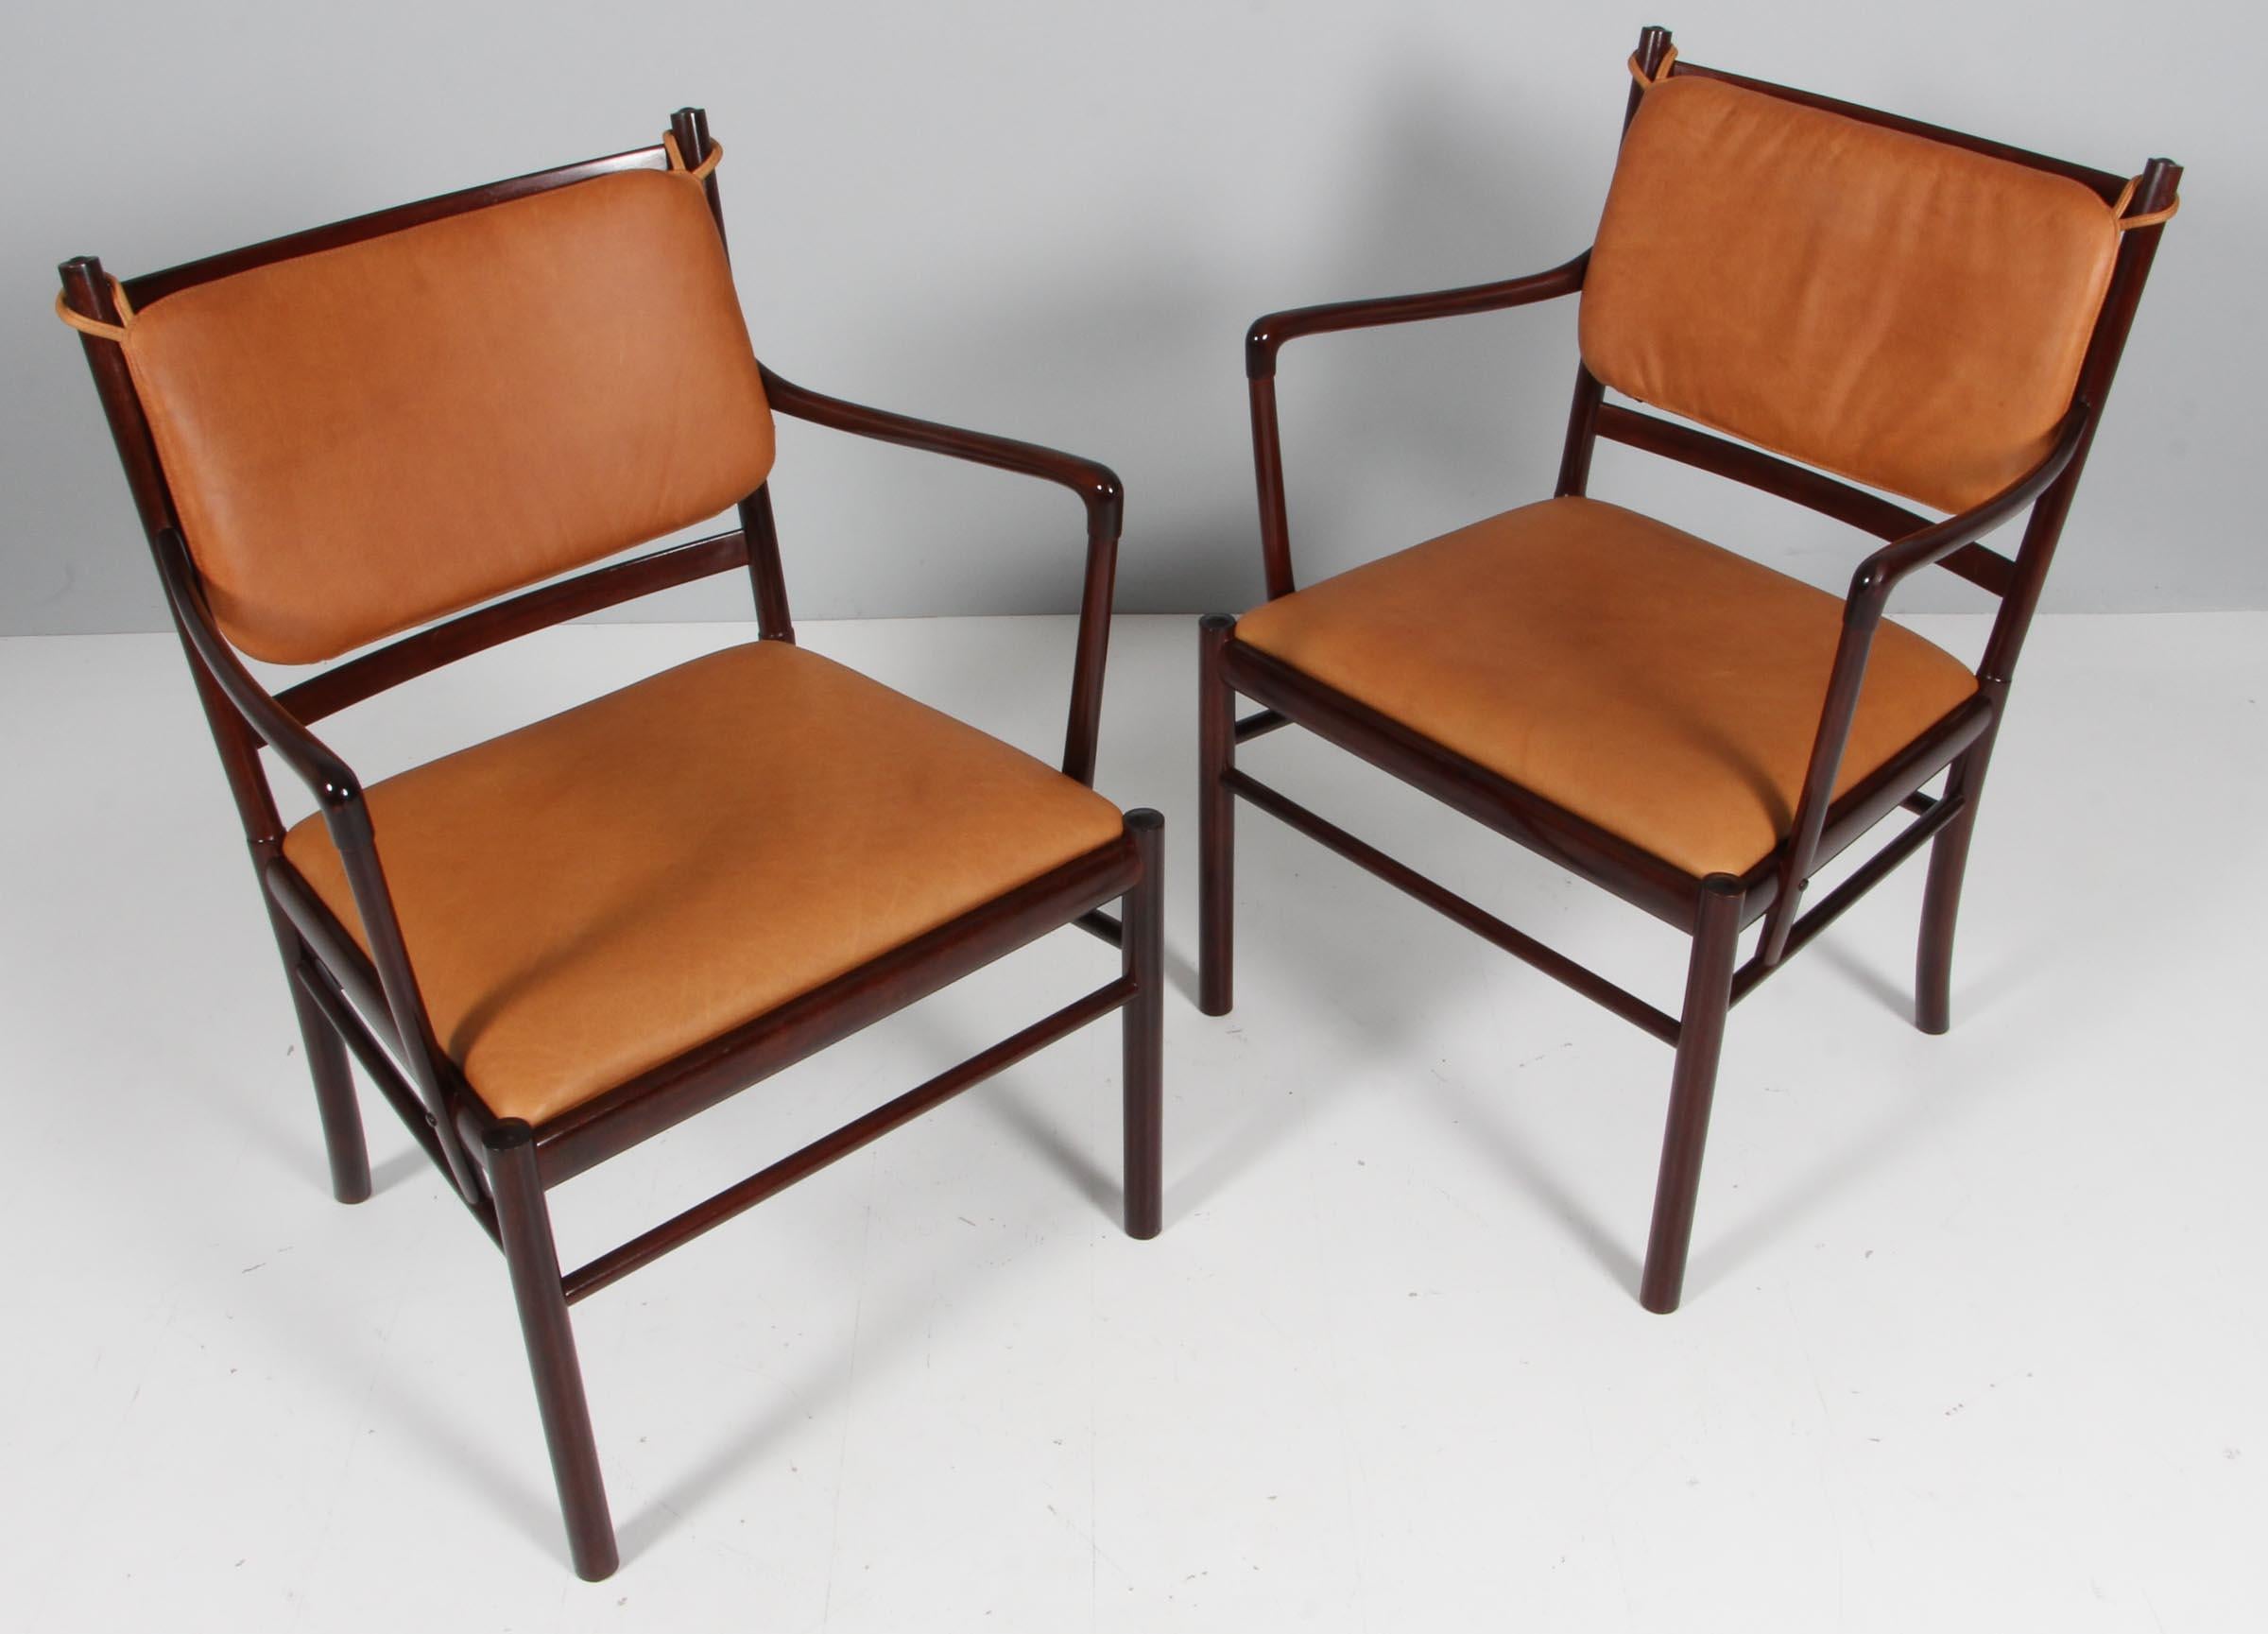 Ole Wanscher armchairs new upholstered with Vintage aniline leather.

Made in mahogany.

Model PJ 301 colonial armchair, made by Poul Jeppesen.